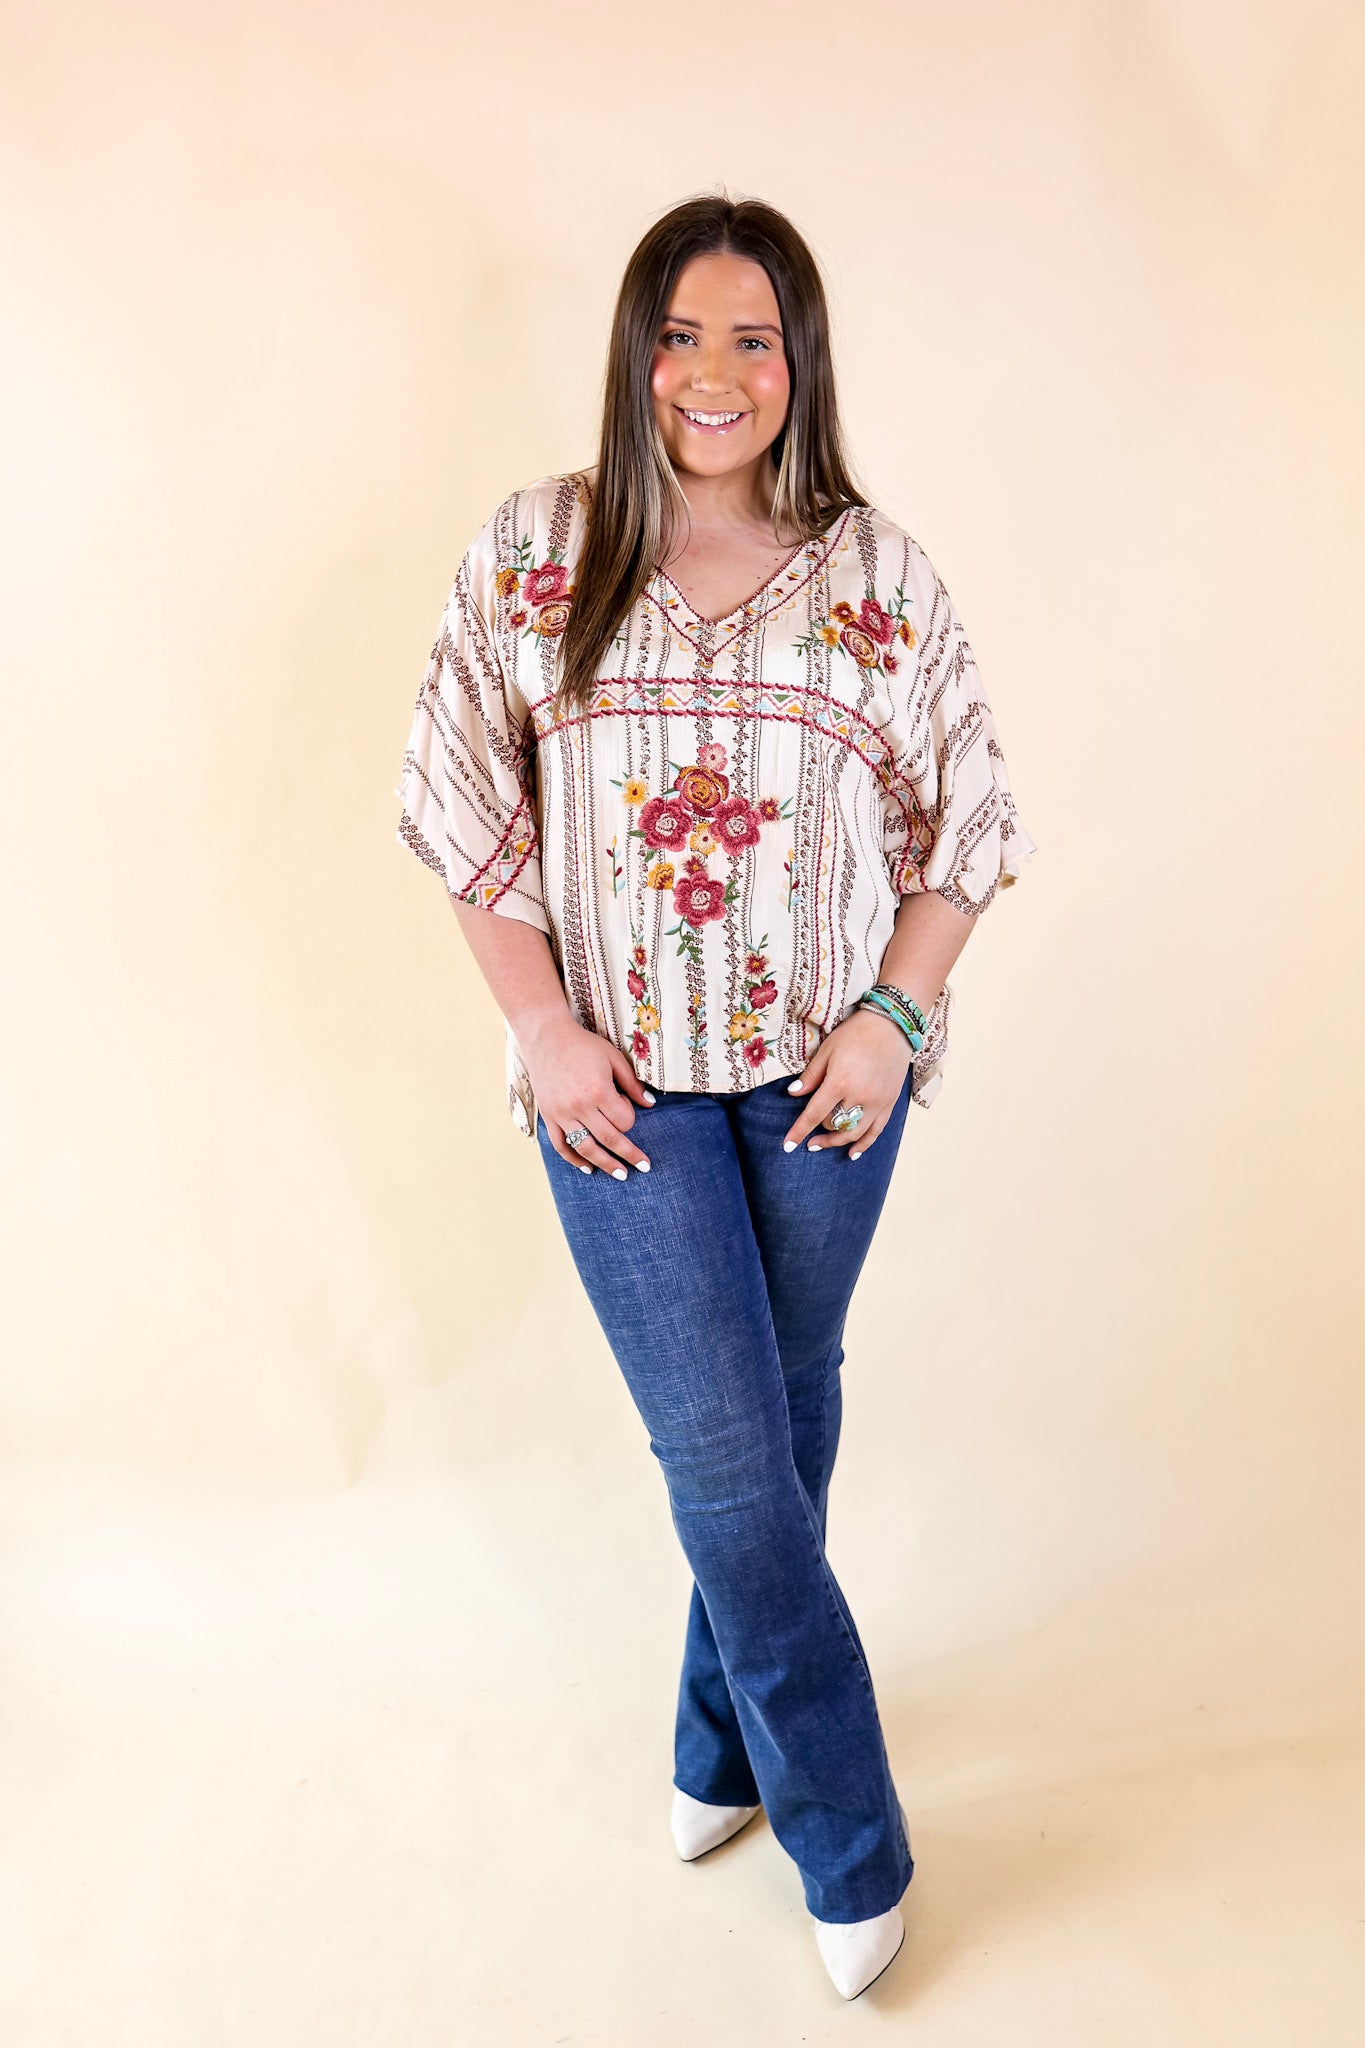 On A High Note Embroidered Poncho Top with V Neck in Ivory - Giddy Up Glamour Boutique